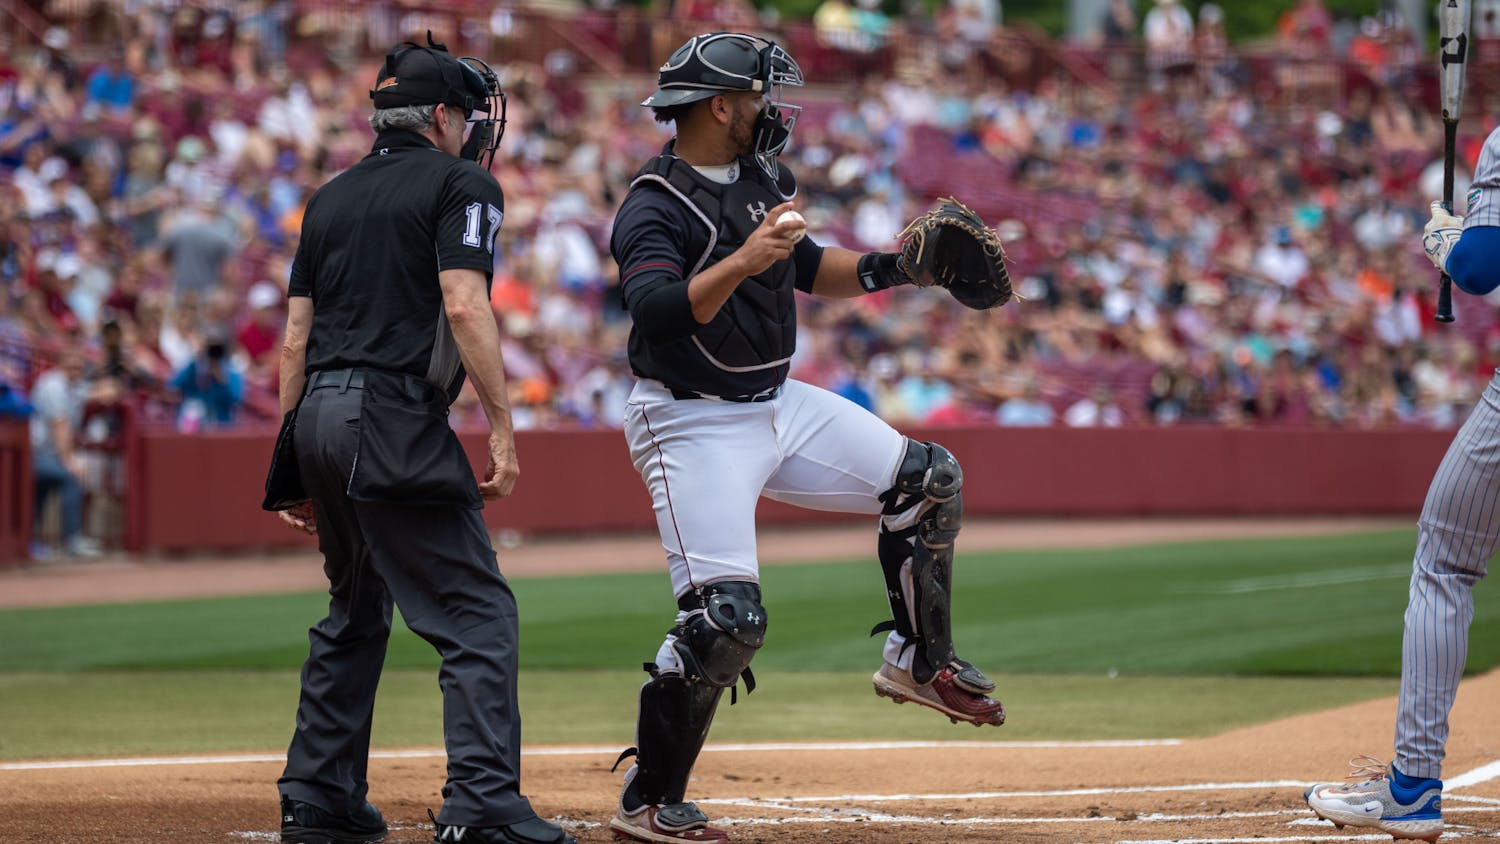 Senior catcher Jonathan French starts to throw the ball back to the pitcher during the South Carolina vs. Florida game at Founders Park on April 22, 2023. French caught the final two games of the series, reaching ten starts in his first season since transferring from Clemson.